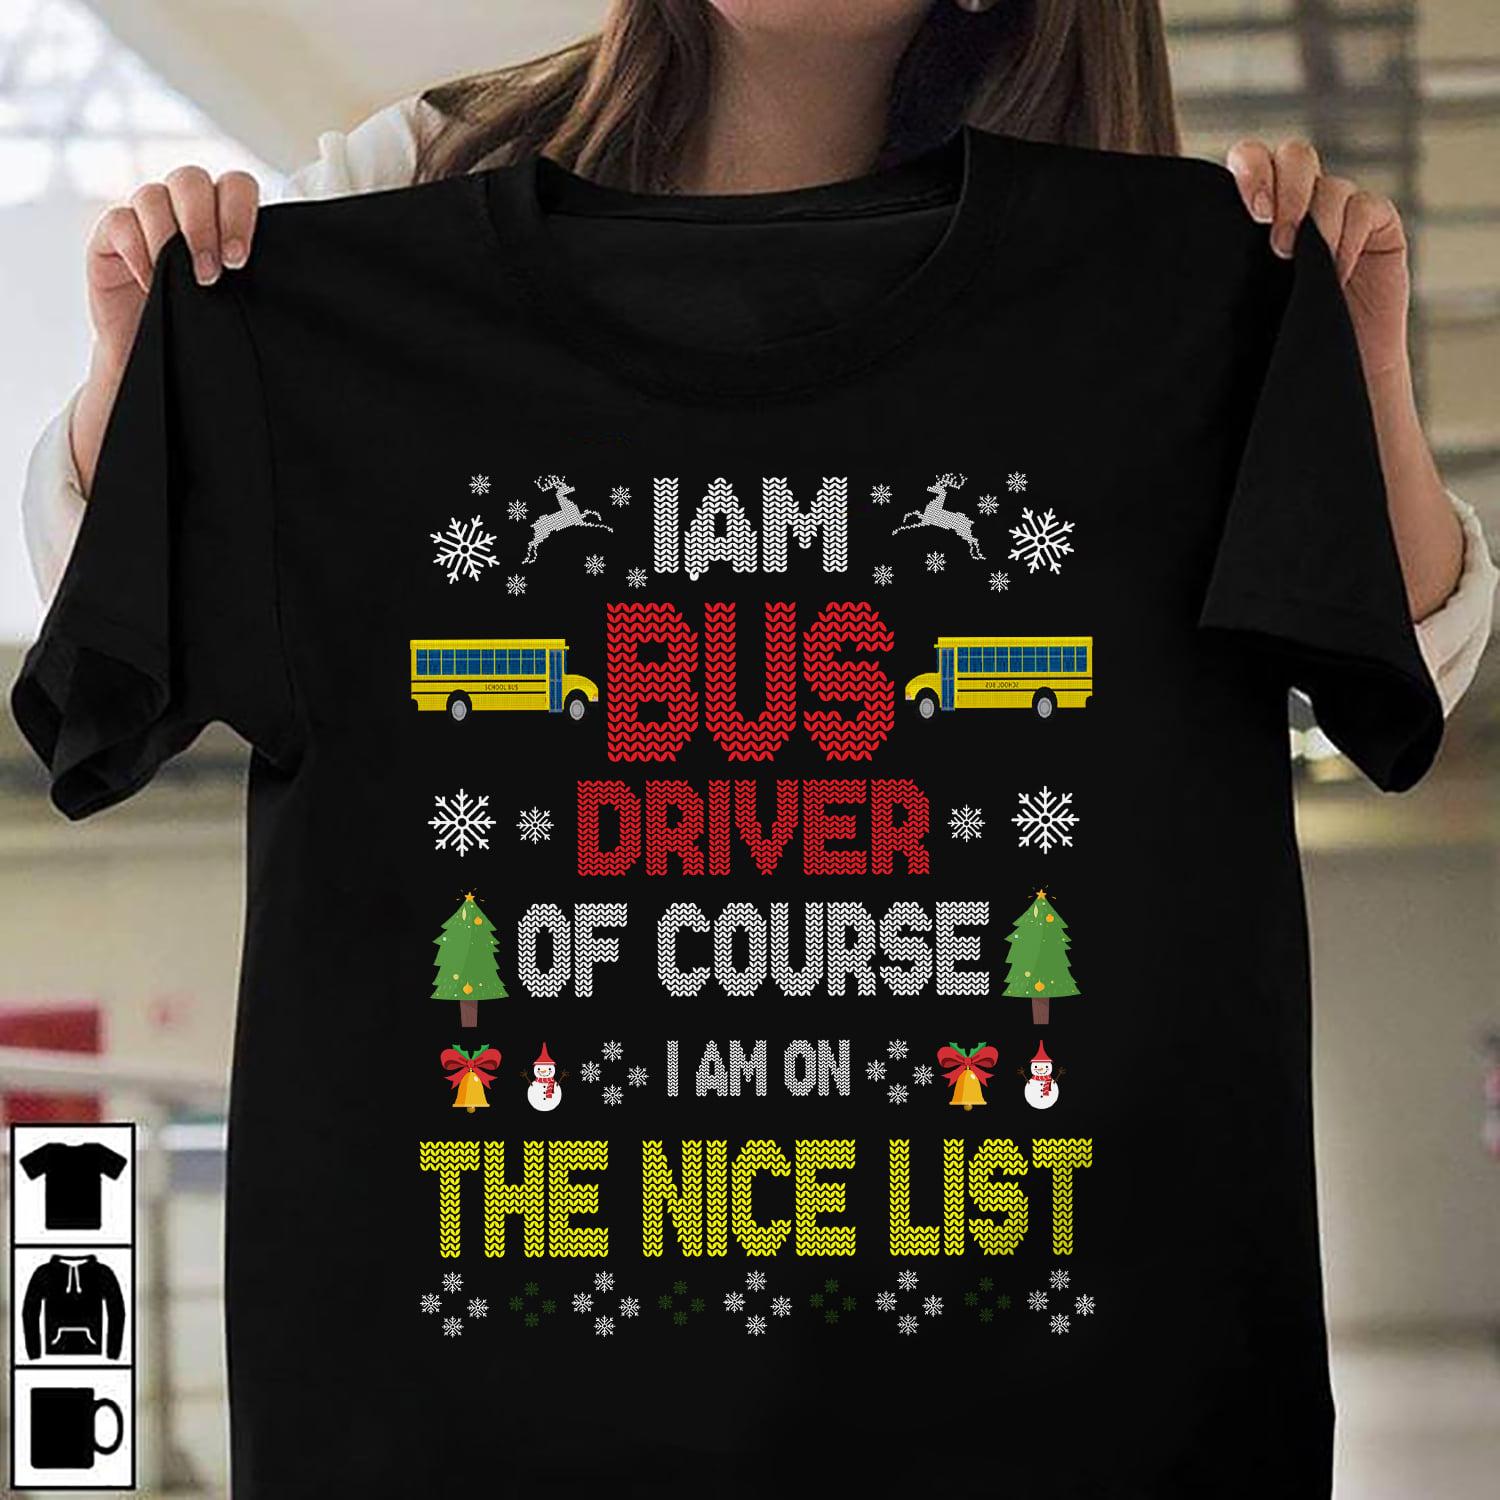 Bus Driver Ugly Sweater - I am bus driver of course i am on the nice list